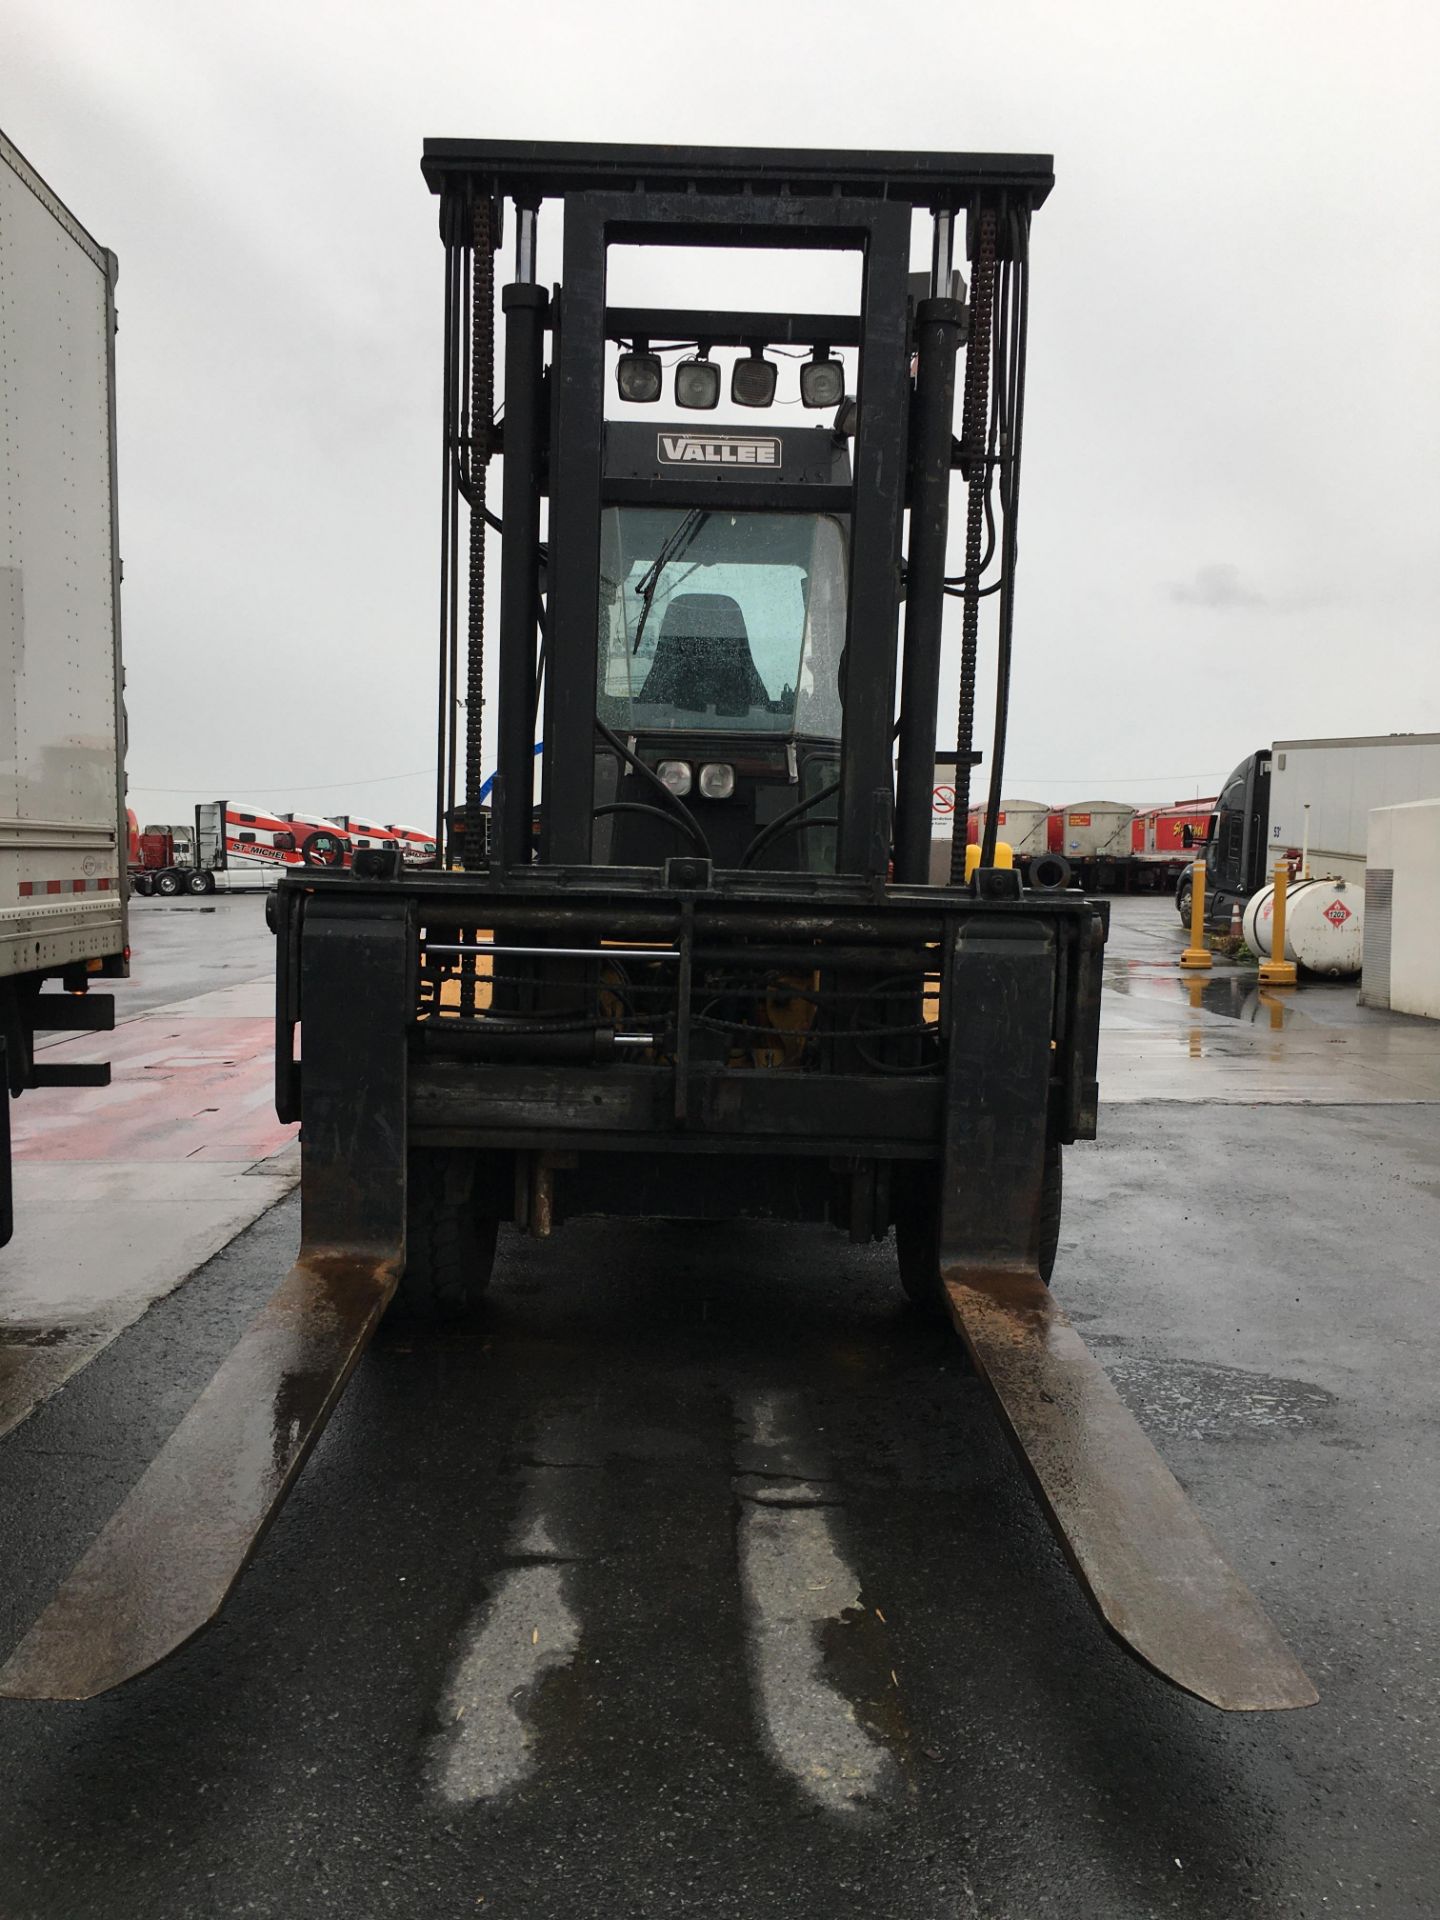 VALLEE 4DA20TL ARTICULATED ROUGH TERRAIN FORKLIFT, 20,000 LBS CAP. (2000) - Image 3 of 9